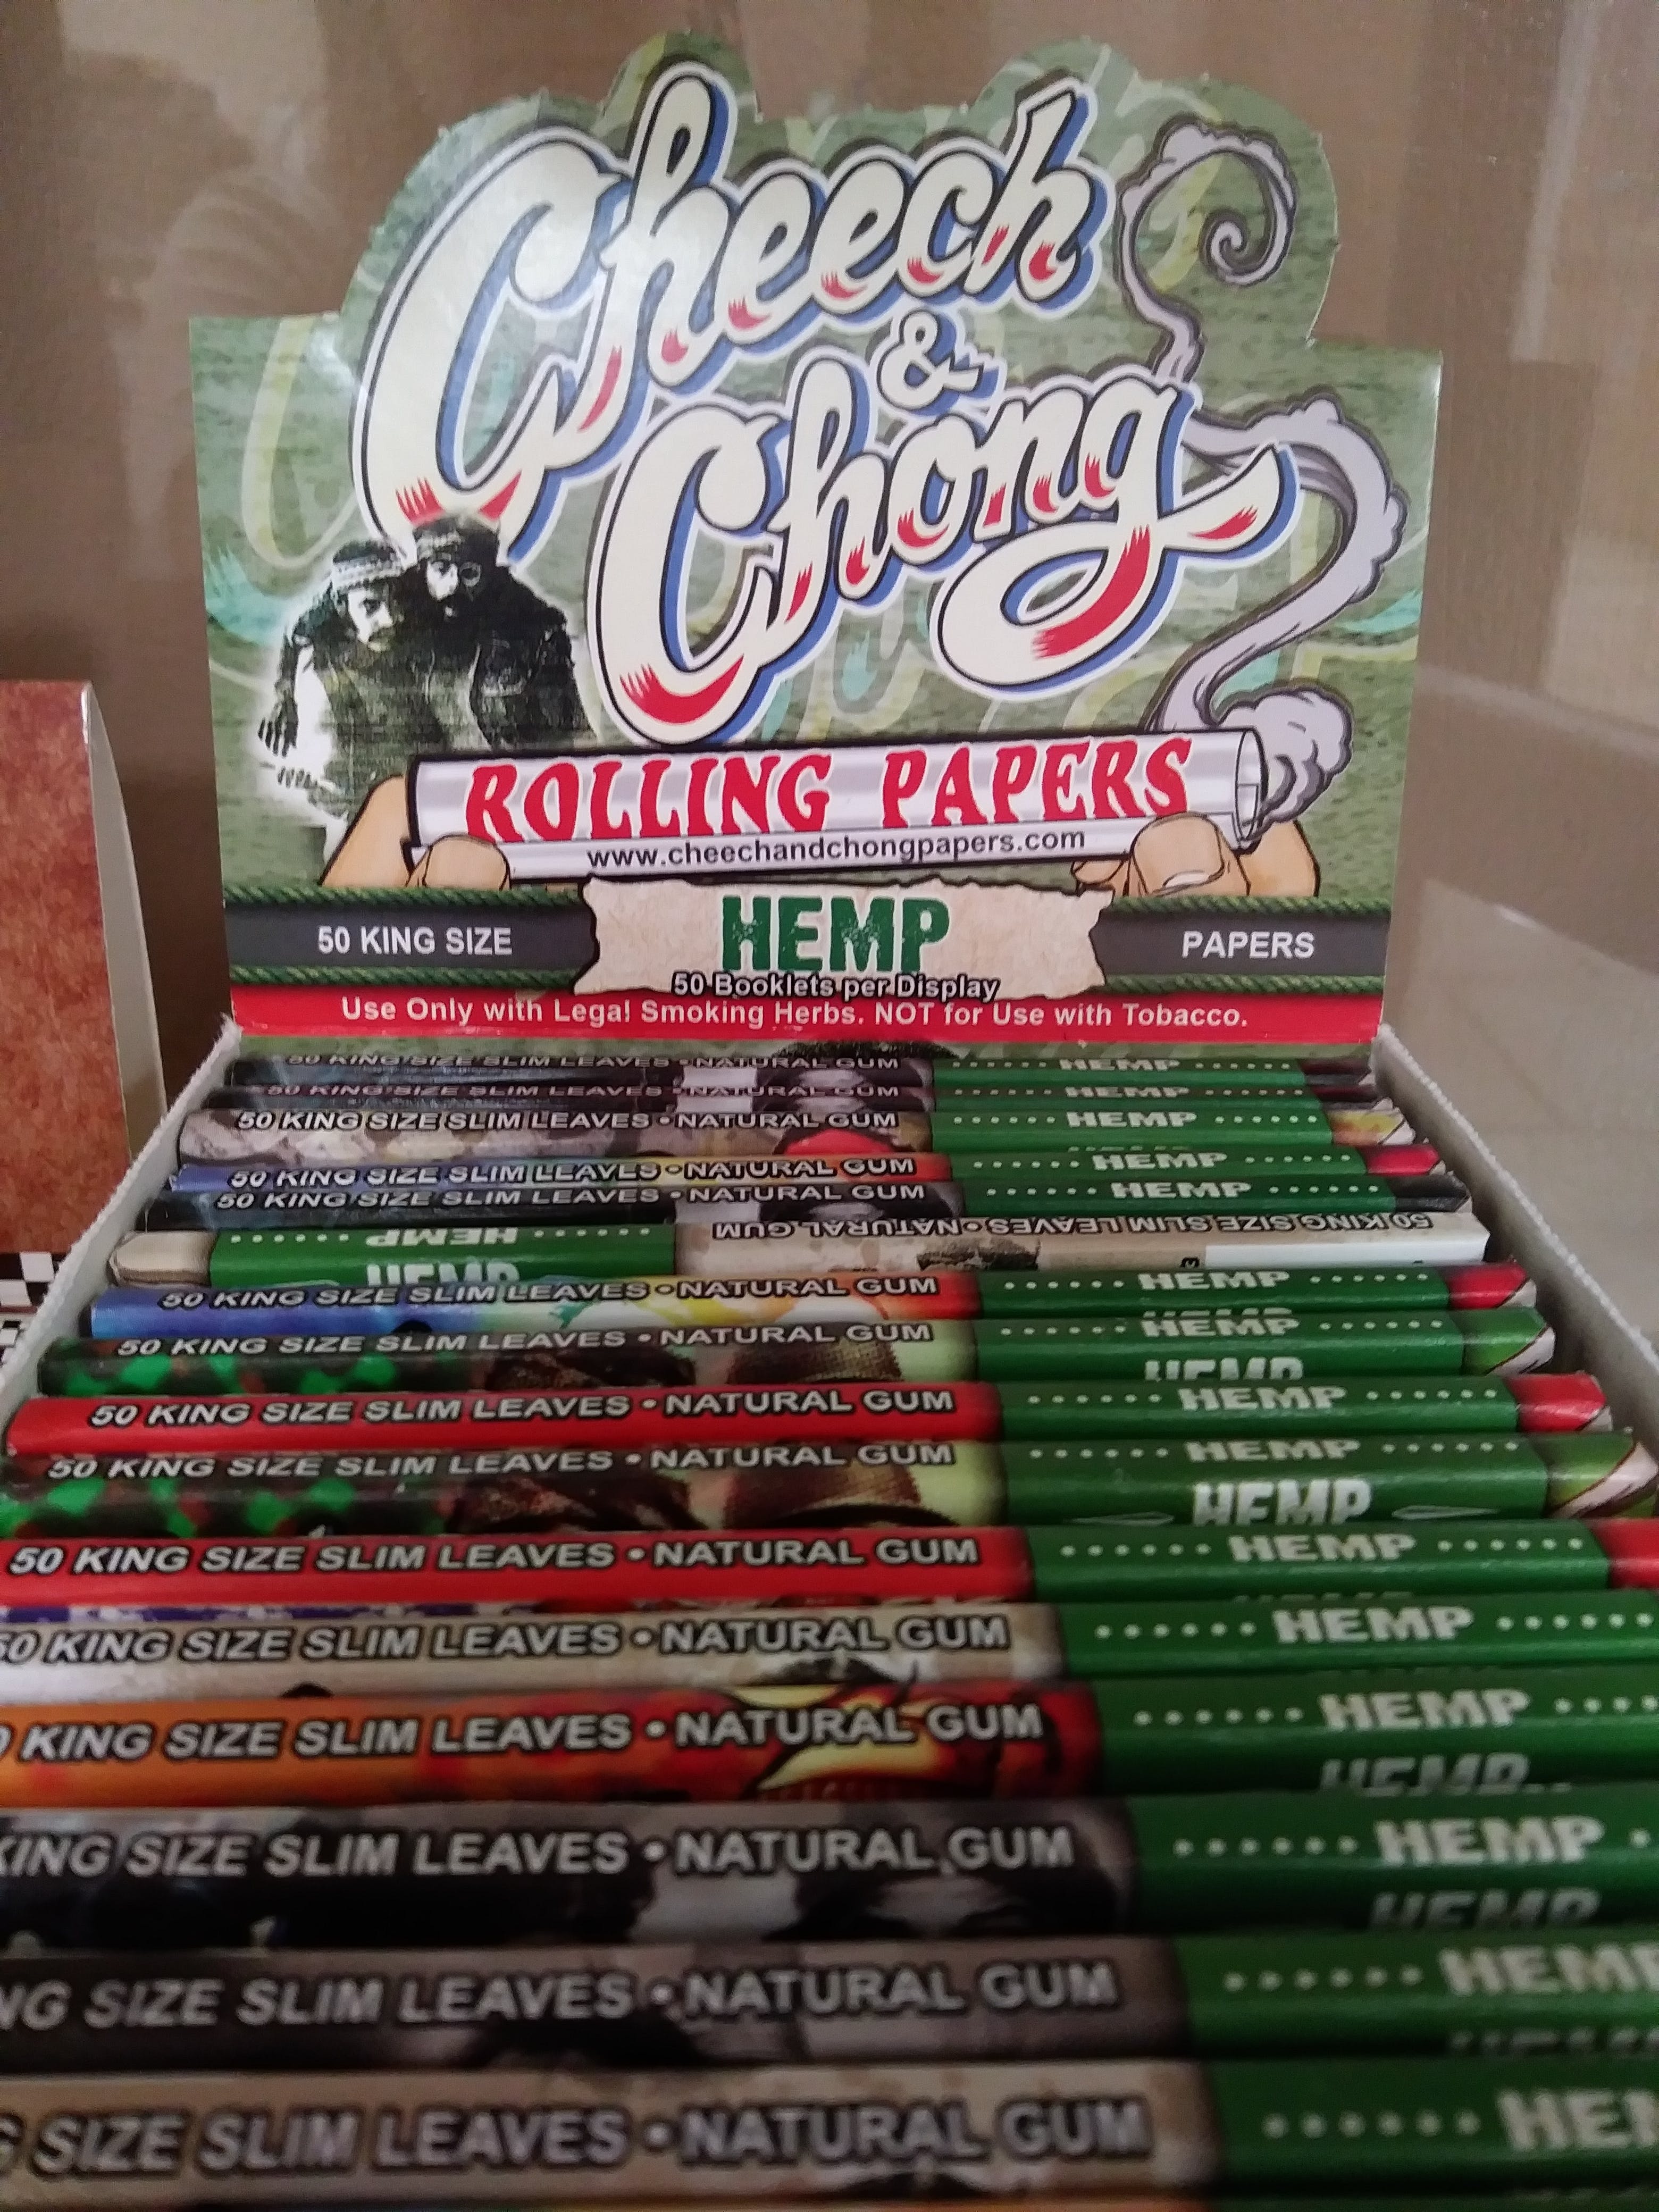 gear-cheech-and-chong-papers